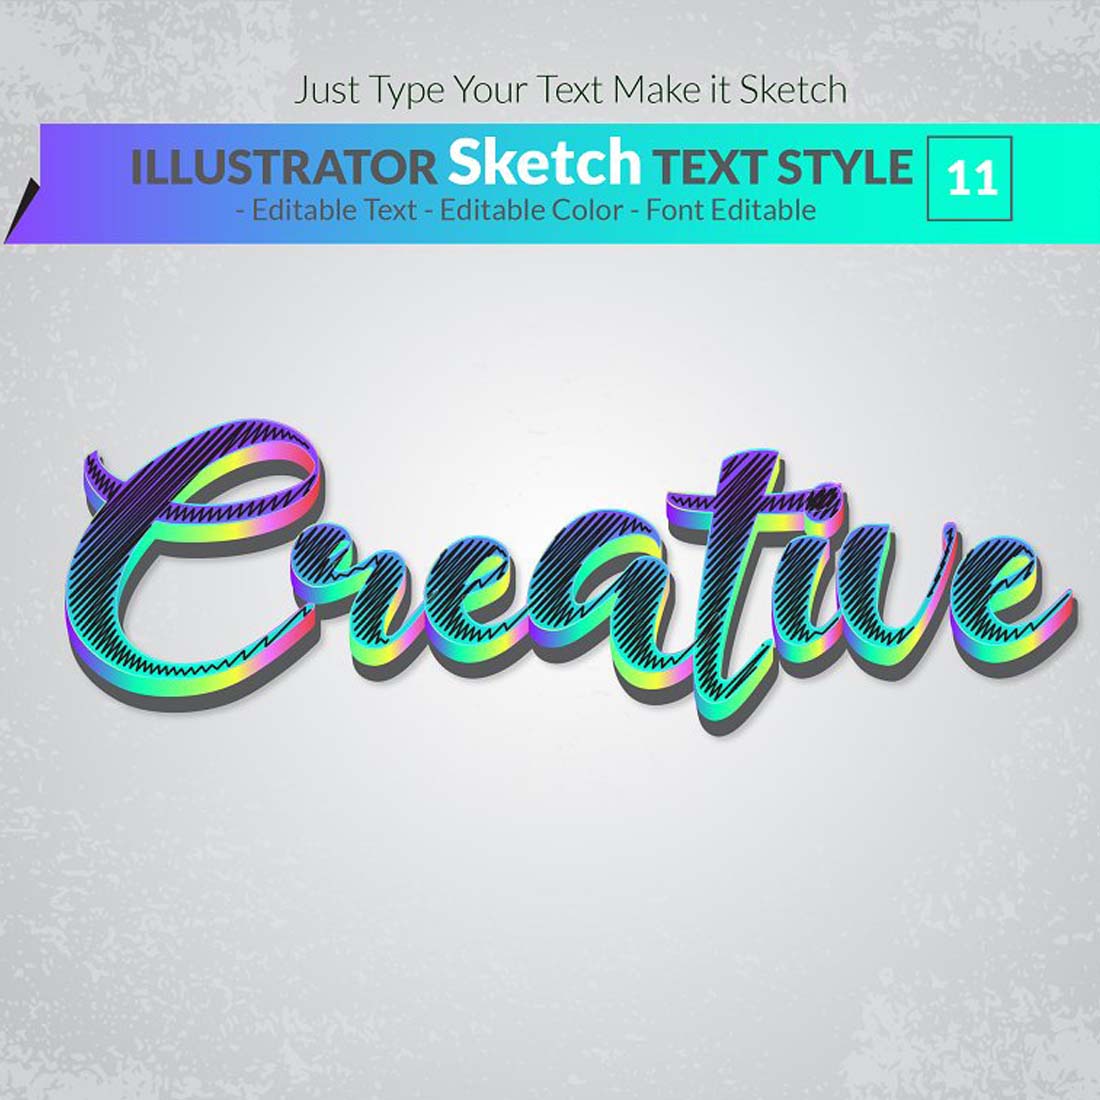 Sketch Text Effect Illustrator preview image.